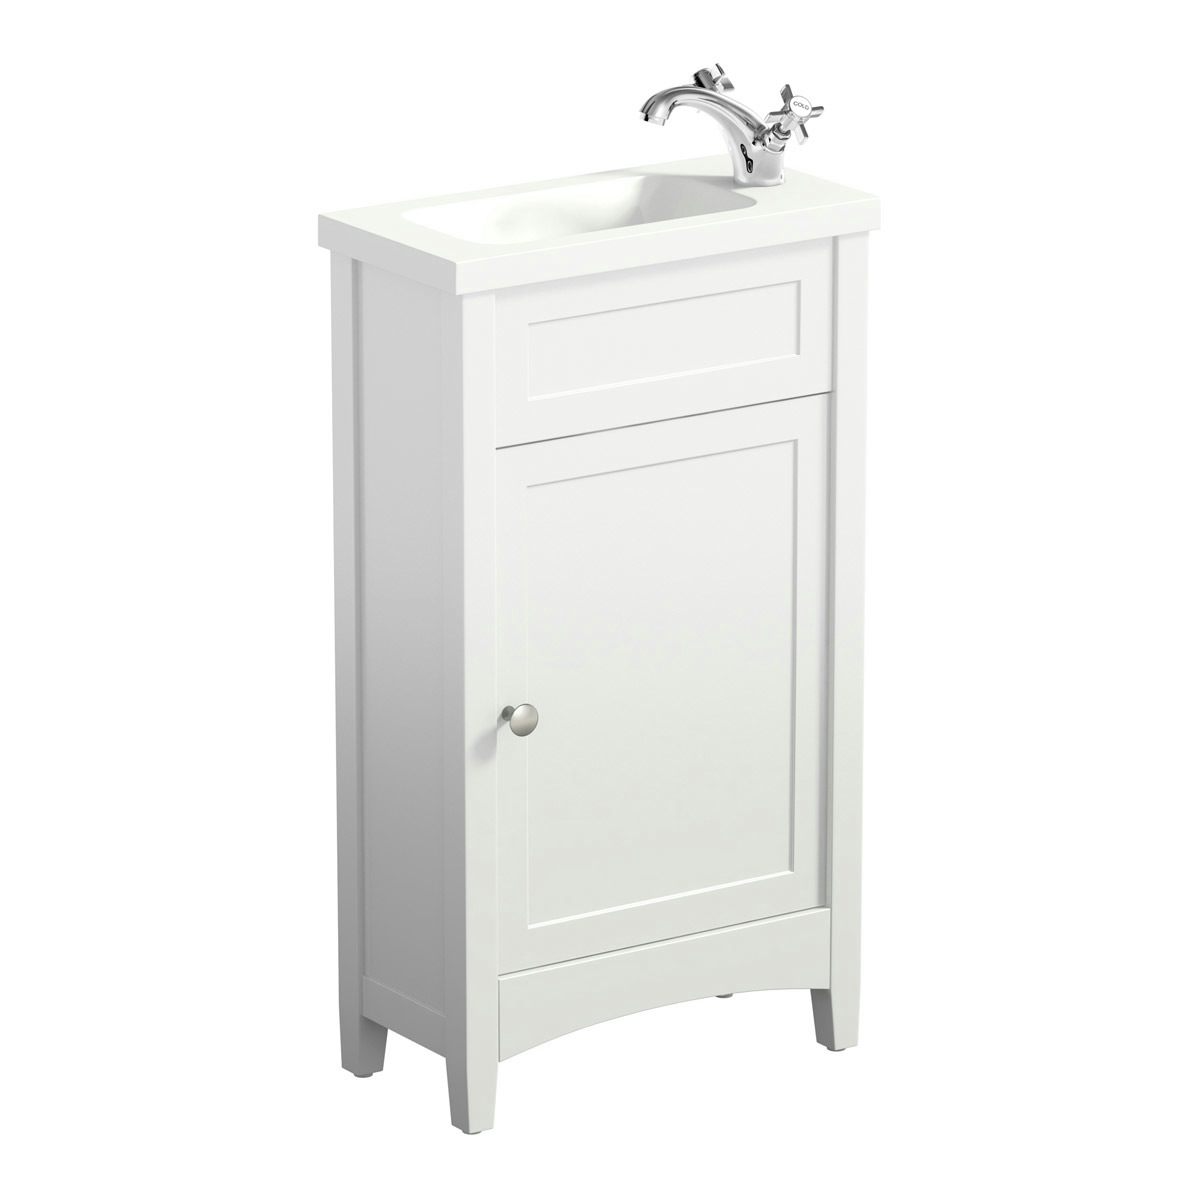 Camberley white cloakroom vanity with resin basin